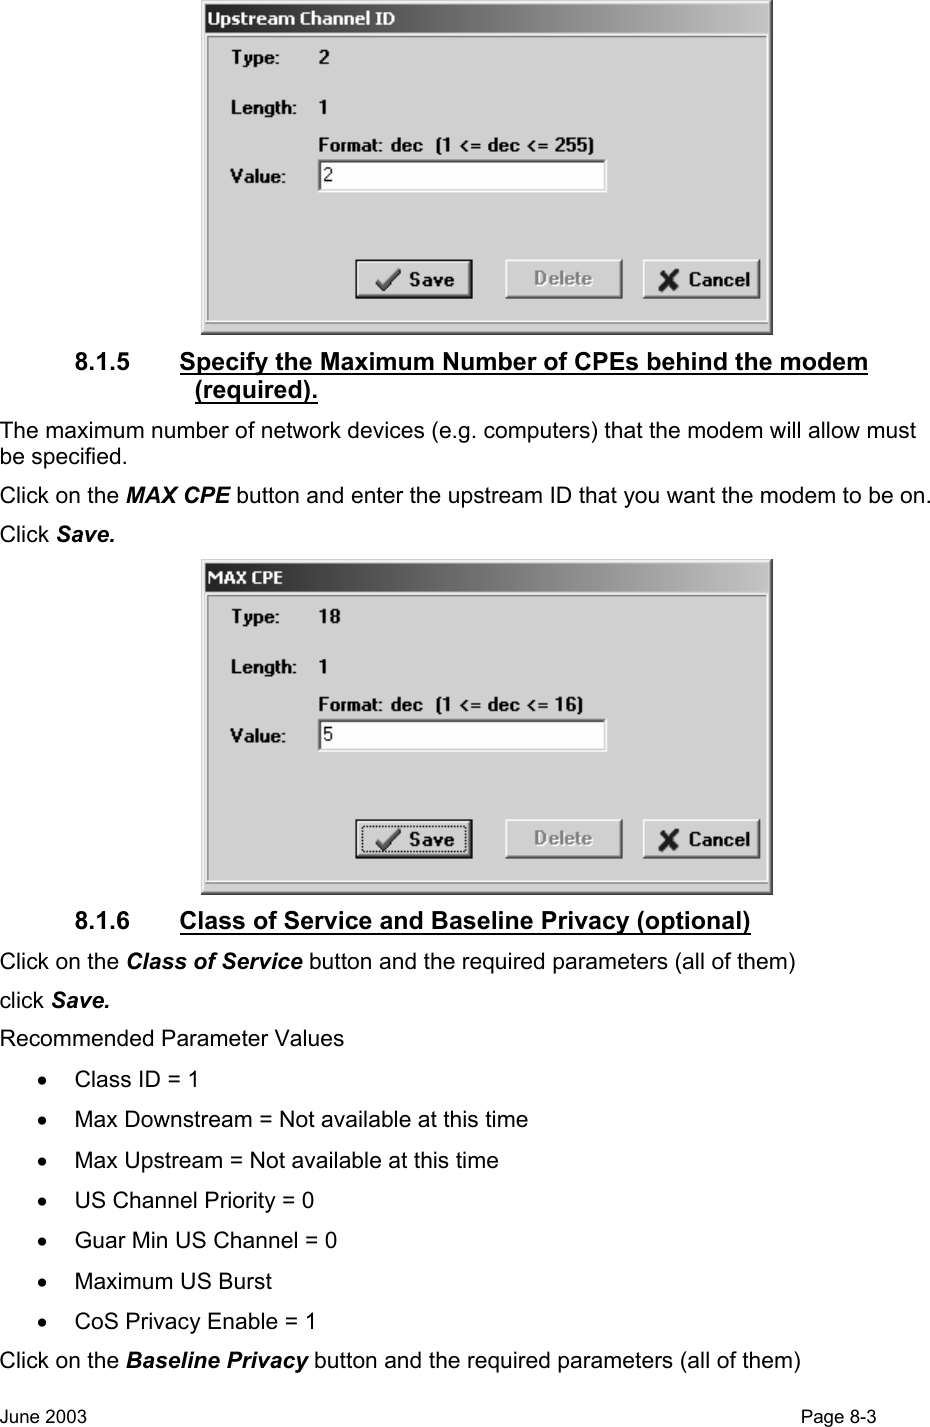   8.1.5  Specify the Maximum Number of CPEs behind the modem (required). The maximum number of network devices (e.g. computers) that the modem will allow must be specified. Click on the MAX CPE button and enter the upstream ID that you want the modem to be on. Click Save.   8.1.6  Class of Service and Baseline Privacy (optional) Click on the Class of Service button and the required parameters (all of them) click Save. Recommended Parameter Values •  Class ID = 1 •  Max Downstream = Not available at this time •  Max Upstream = Not available at this time •  US Channel Priority = 0 •  Guar Min US Channel = 0 • Maximum US Burst •  CoS Privacy Enable = 1 Click on the Baseline Privacy button and the required parameters (all of them) June 2003                                                                                                                                         Page 8-3  